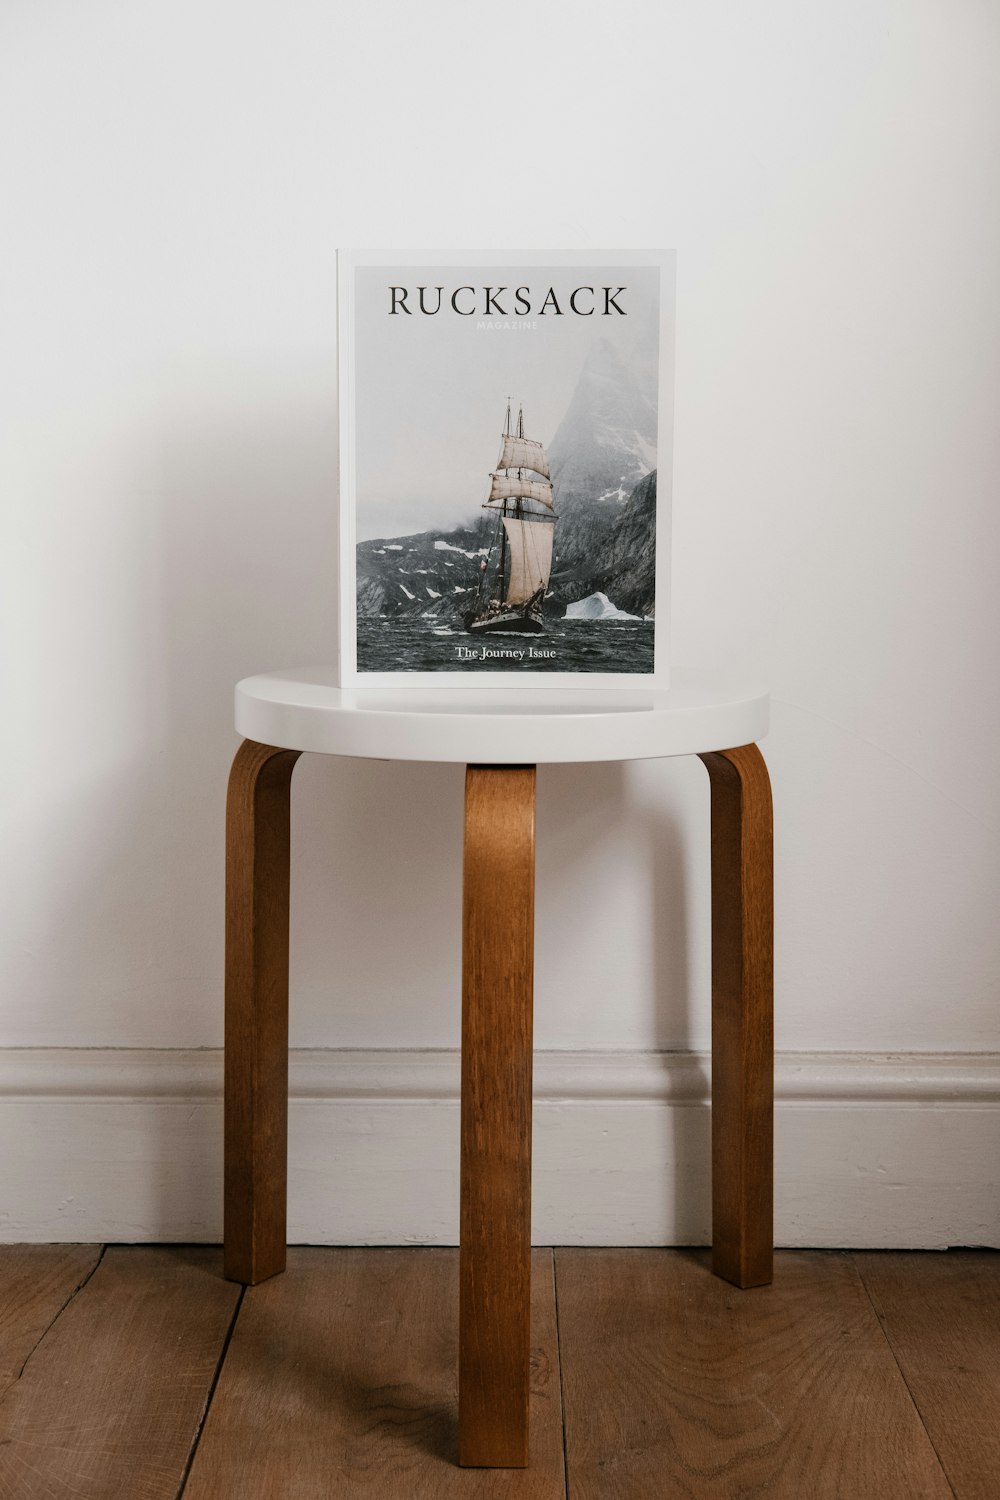 Rucksack book on side table